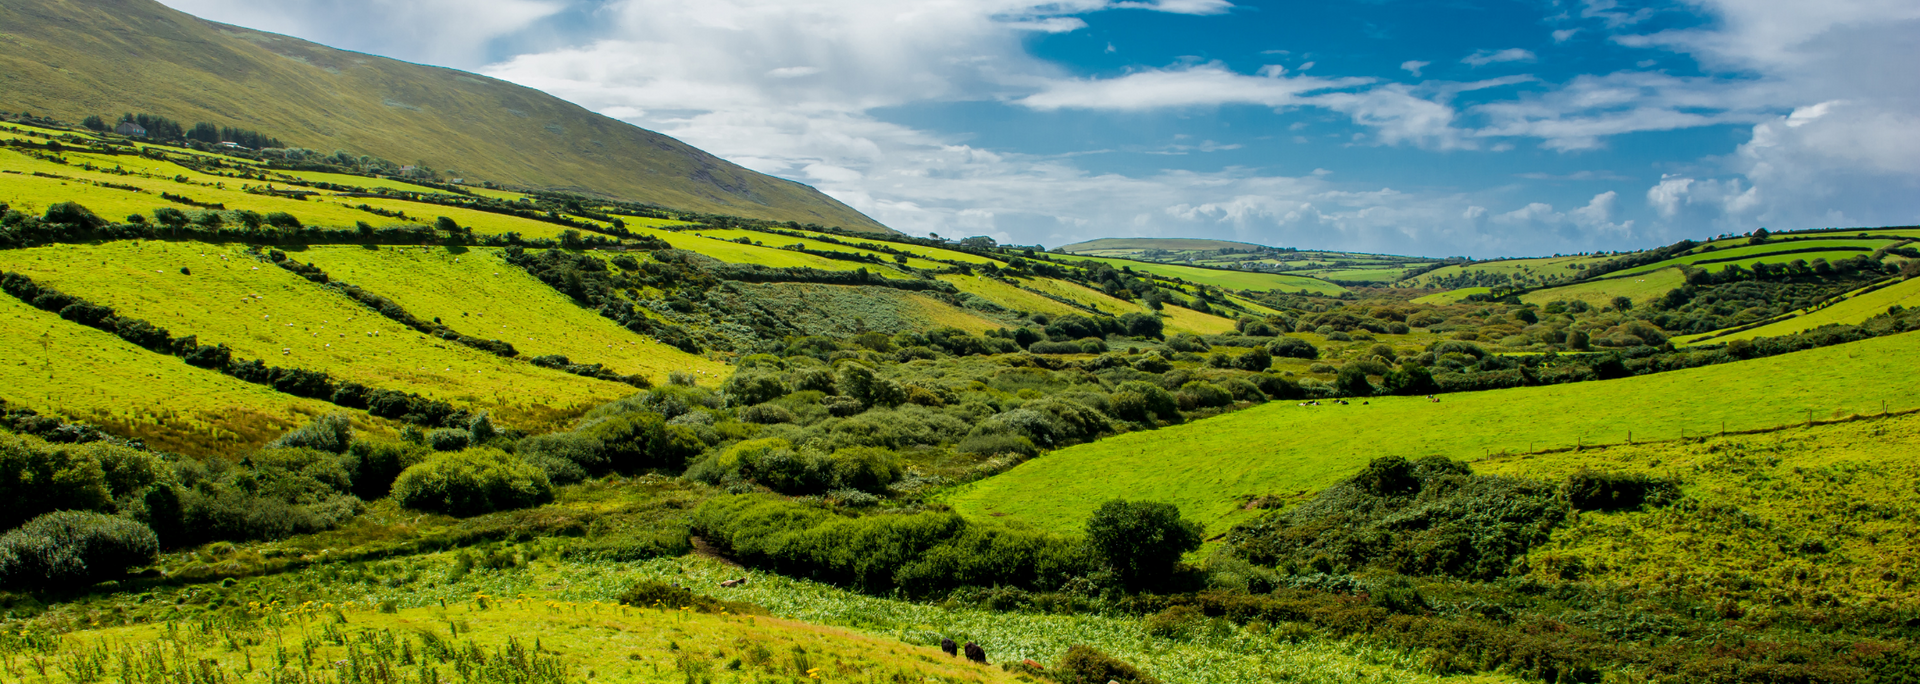 Picture of a rural landscape in Ireland